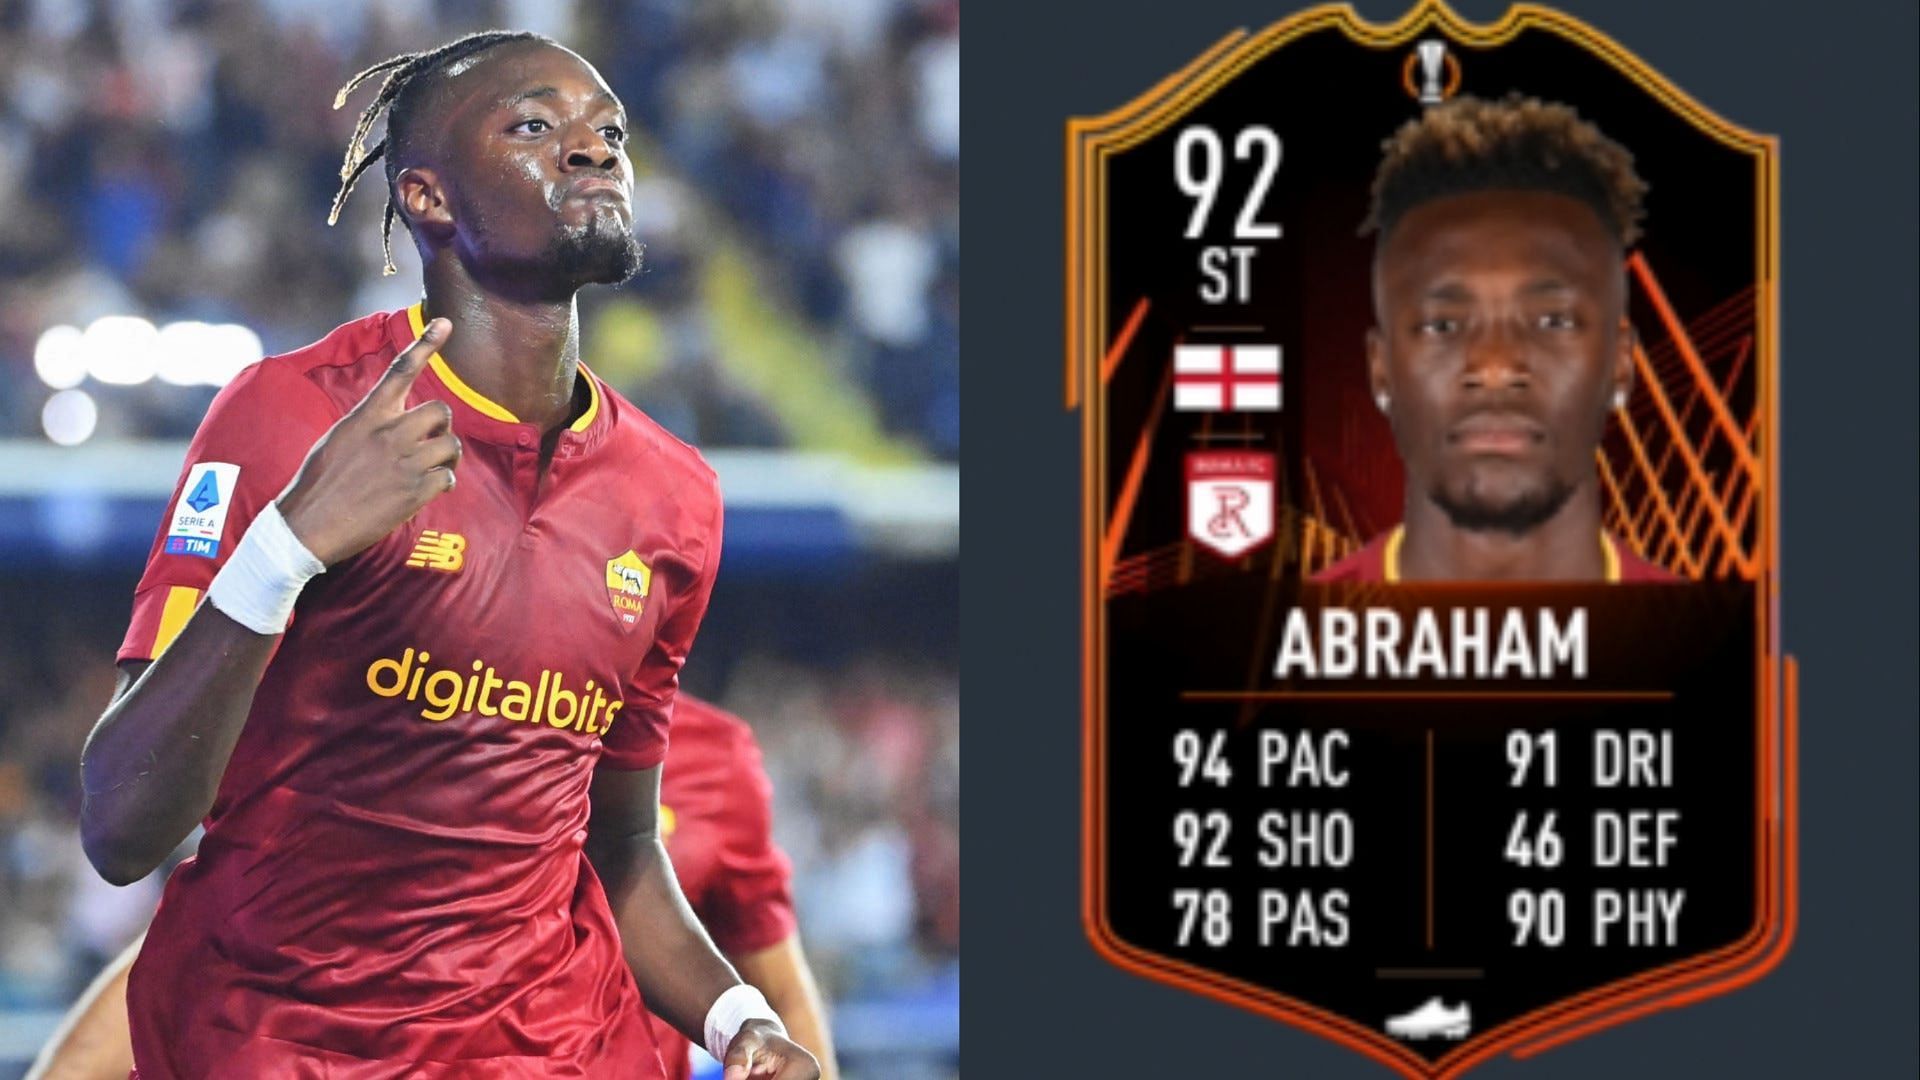 The Tammy Abraham RTTF SBC could be a valuable addition to FIFA 23 players (Images via Goal, EA Sports)